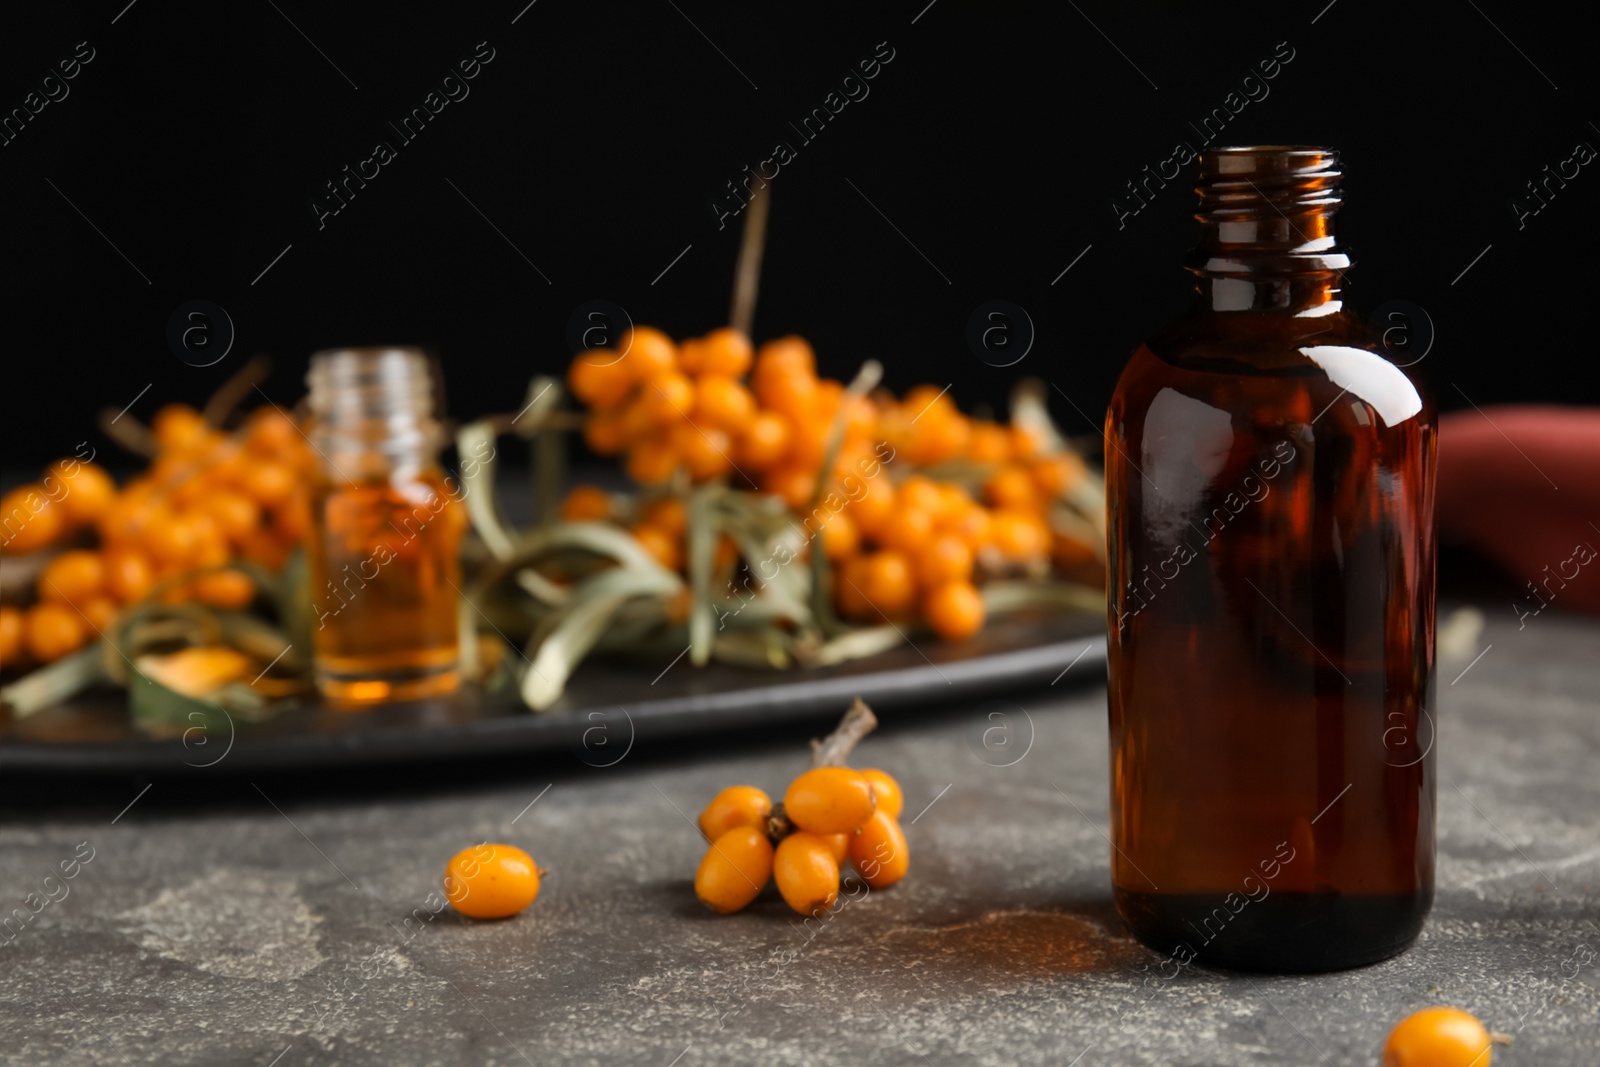 Photo of Ripe sea buckthorn and bottle of essential oil on grey table against black background